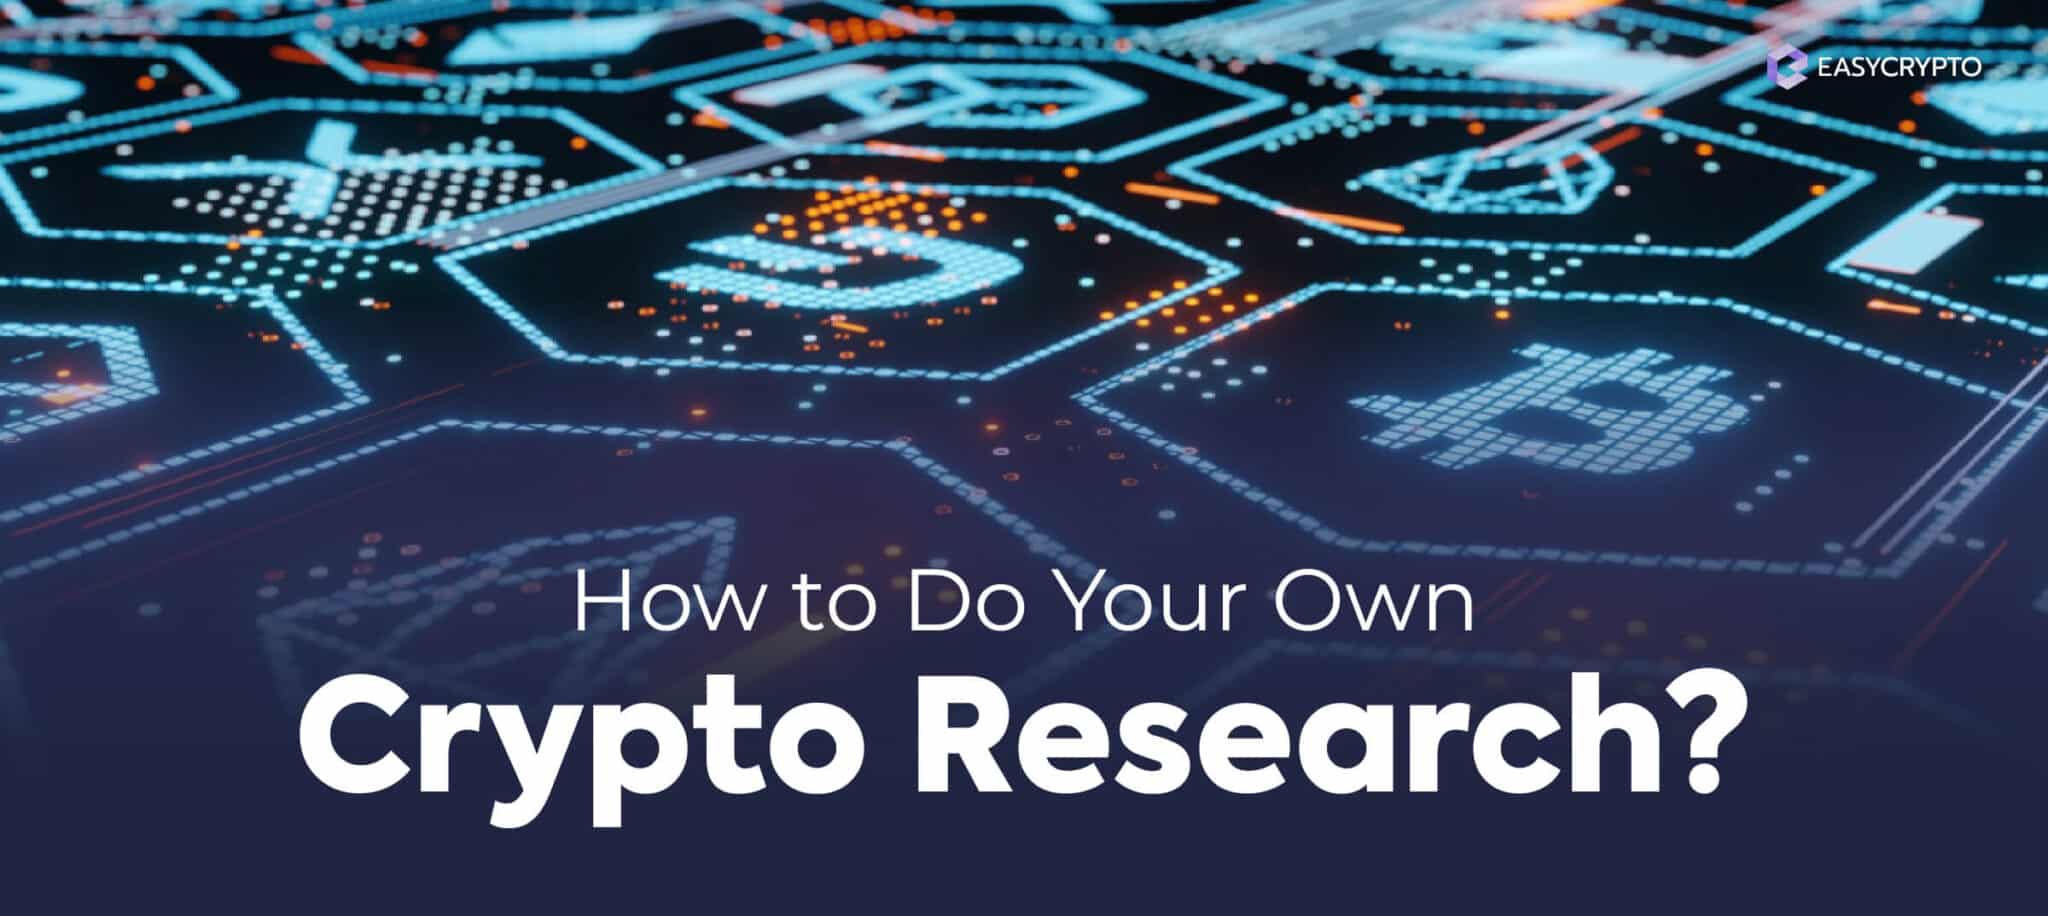 How to do cryptocurrency research ledger x crypto wallet